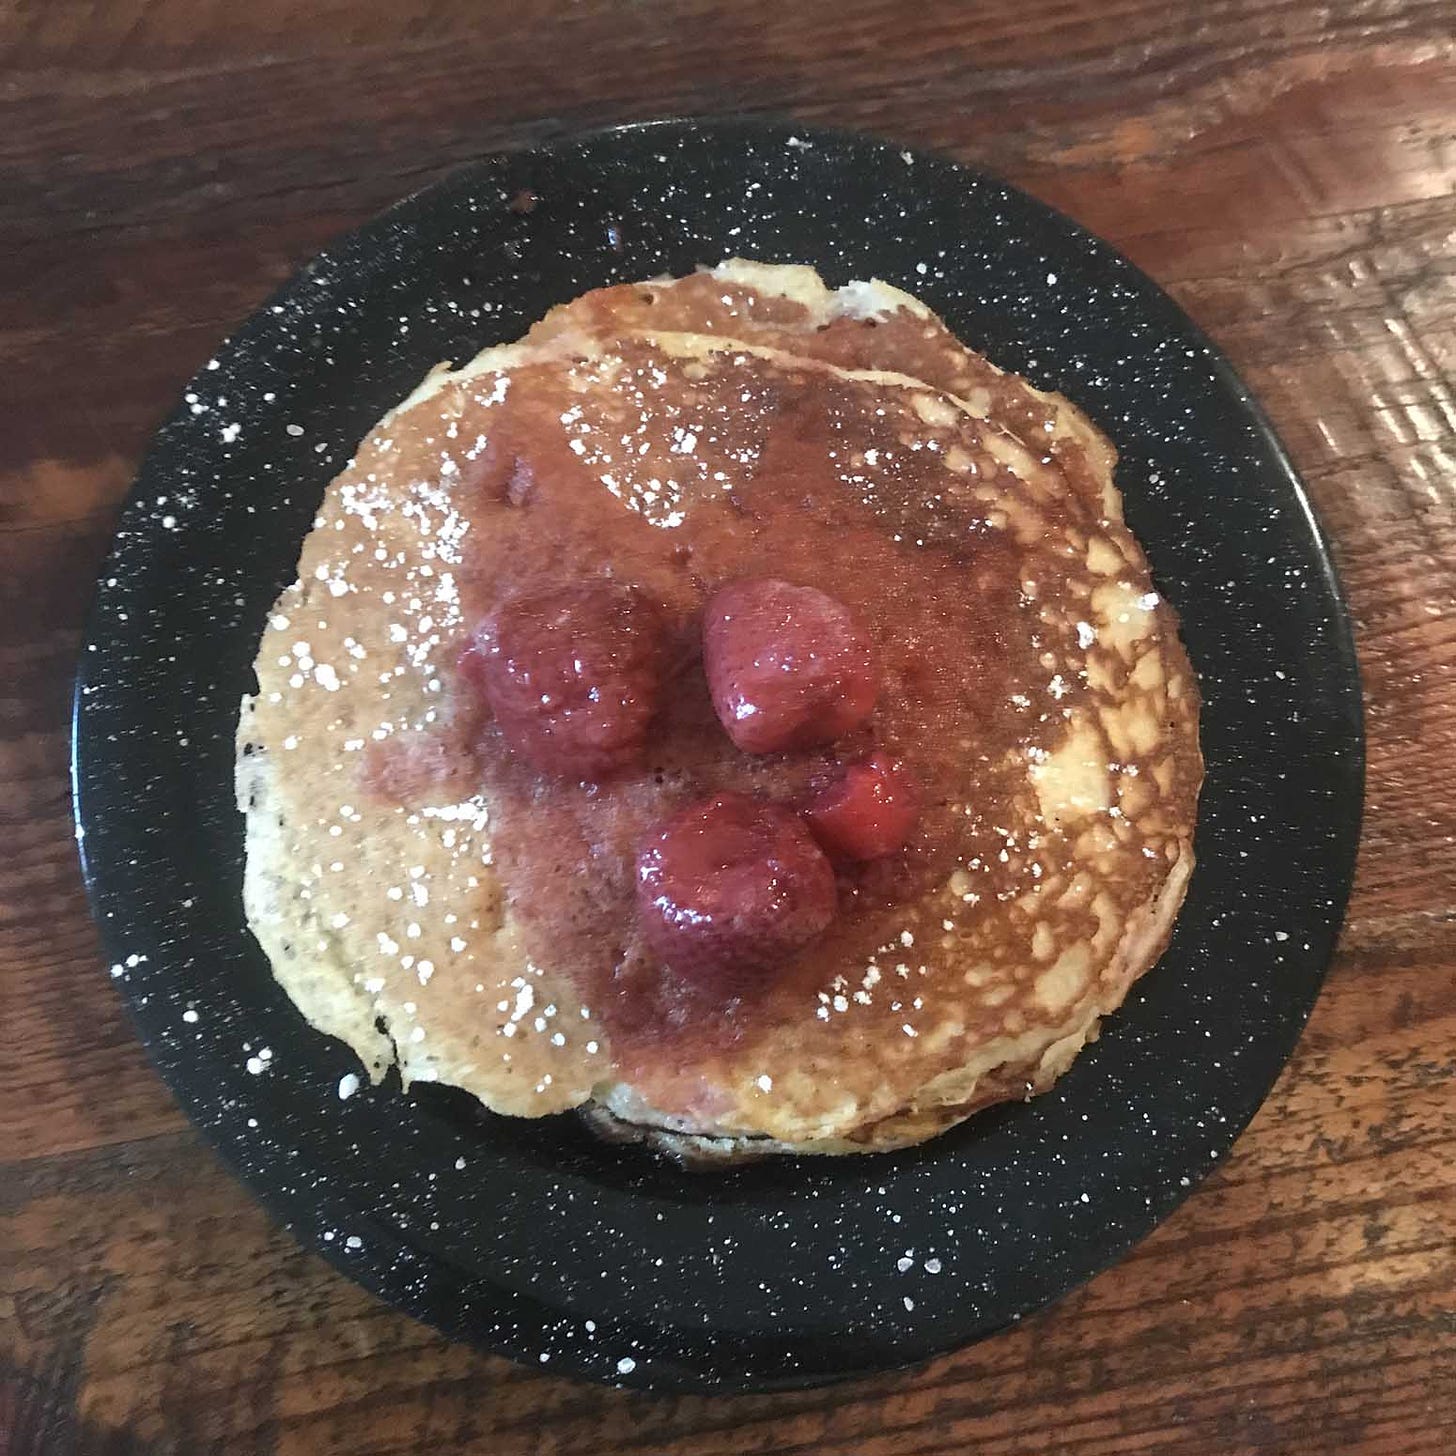 A photo I took of pancakes with blueberry compote on top and the strawberries do kinda look like The Polyp Man